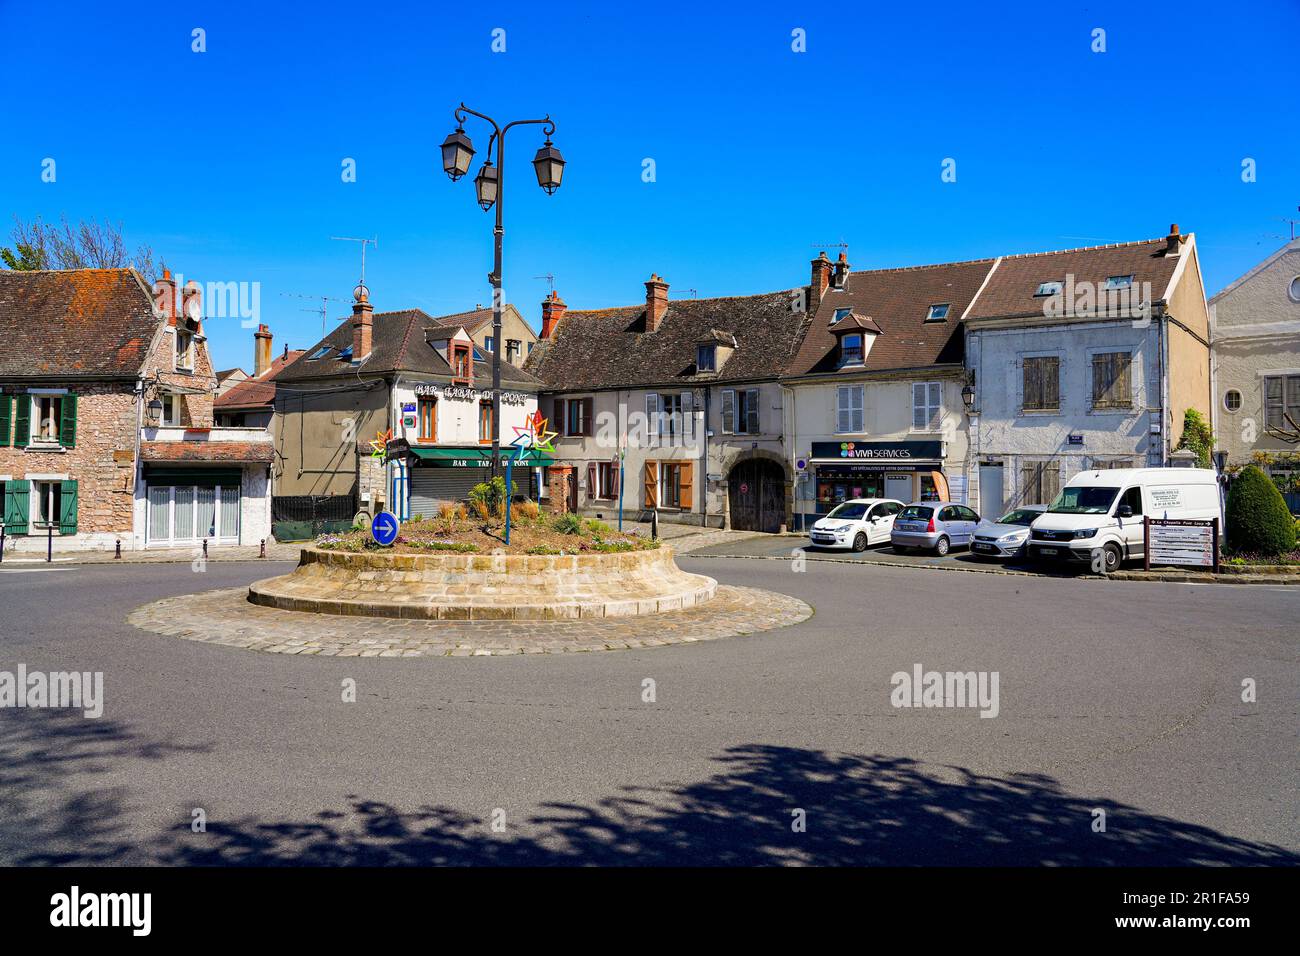 Roundabout in the medieval town of Moret-sur-Loing in Seine et Marne, France Stock Photo